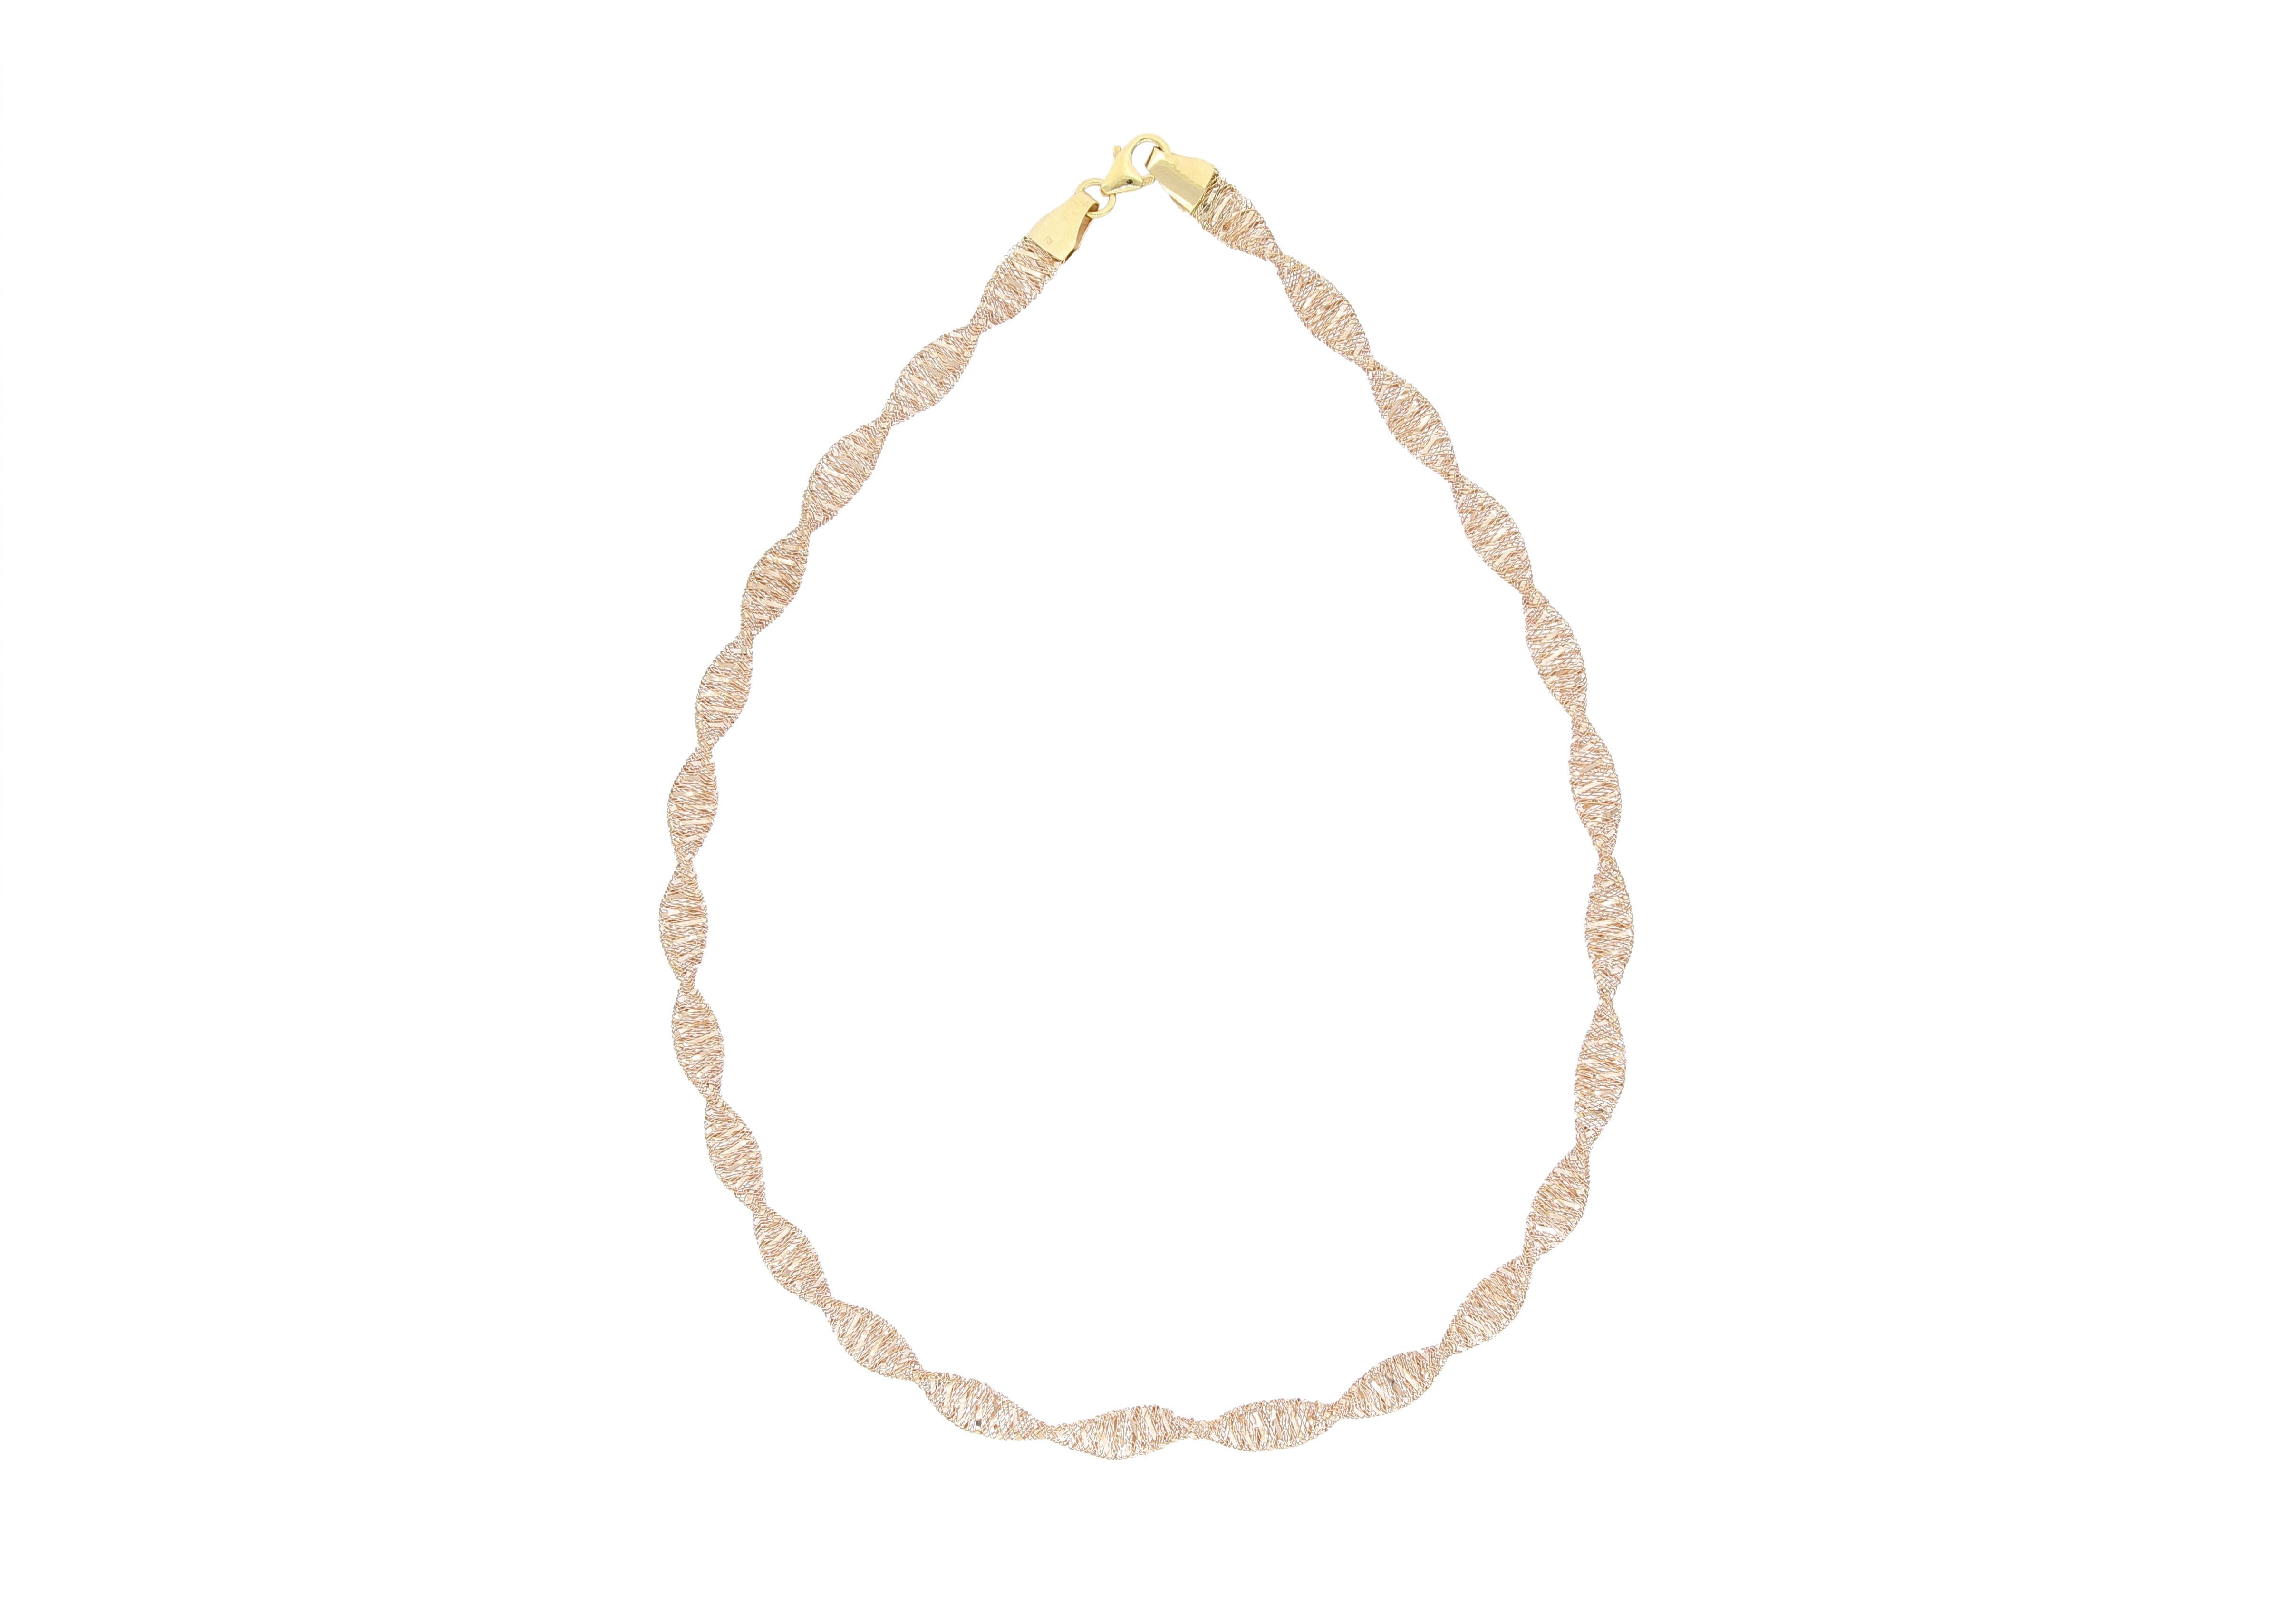 A stylish 18K rose gold necklace with twisted design, Italian made, a very simple and nice piece of jewellery.
The company is renowned for its high jewellery collections with fabulous designs. Our designs reflect the cultural and aesthetic value of